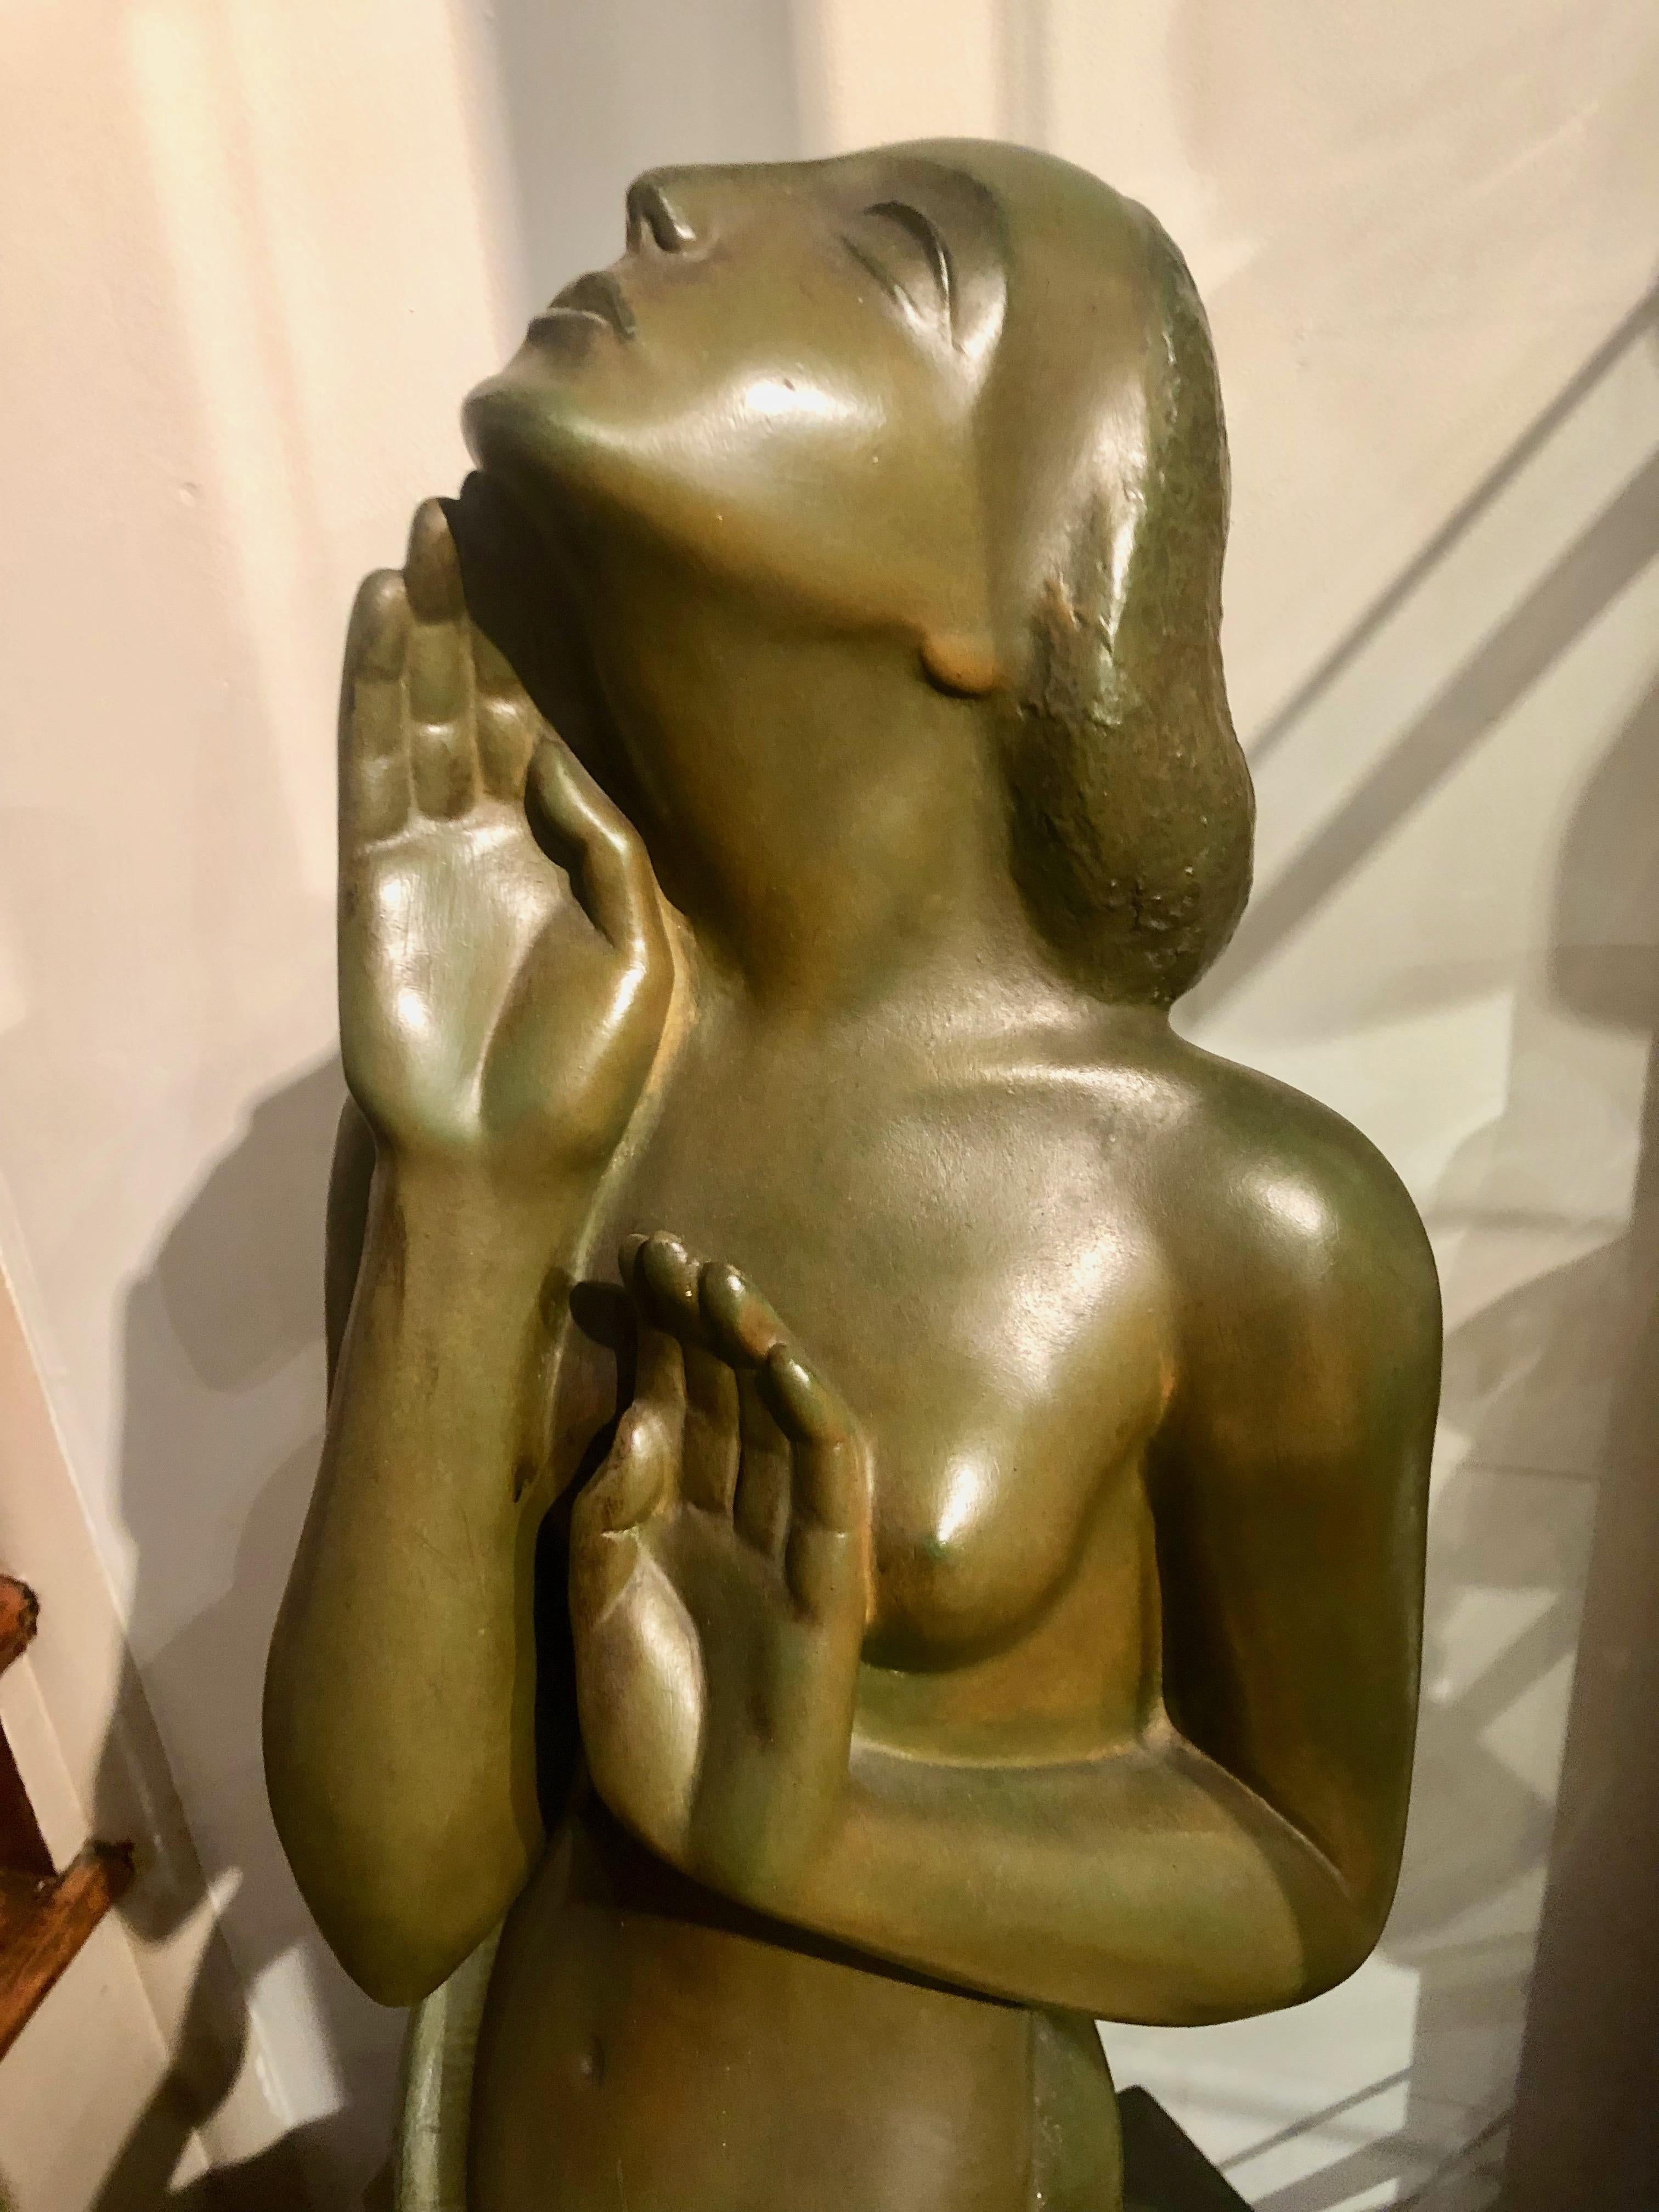 Art Deco female bronze sculpture by important Belgian artist, Jan Anteunis who worked primarily in the city of Ghent. A large and dramatic sculpture that features a very detailed and unusual stylized simply clothed woman who could be kneeling in a